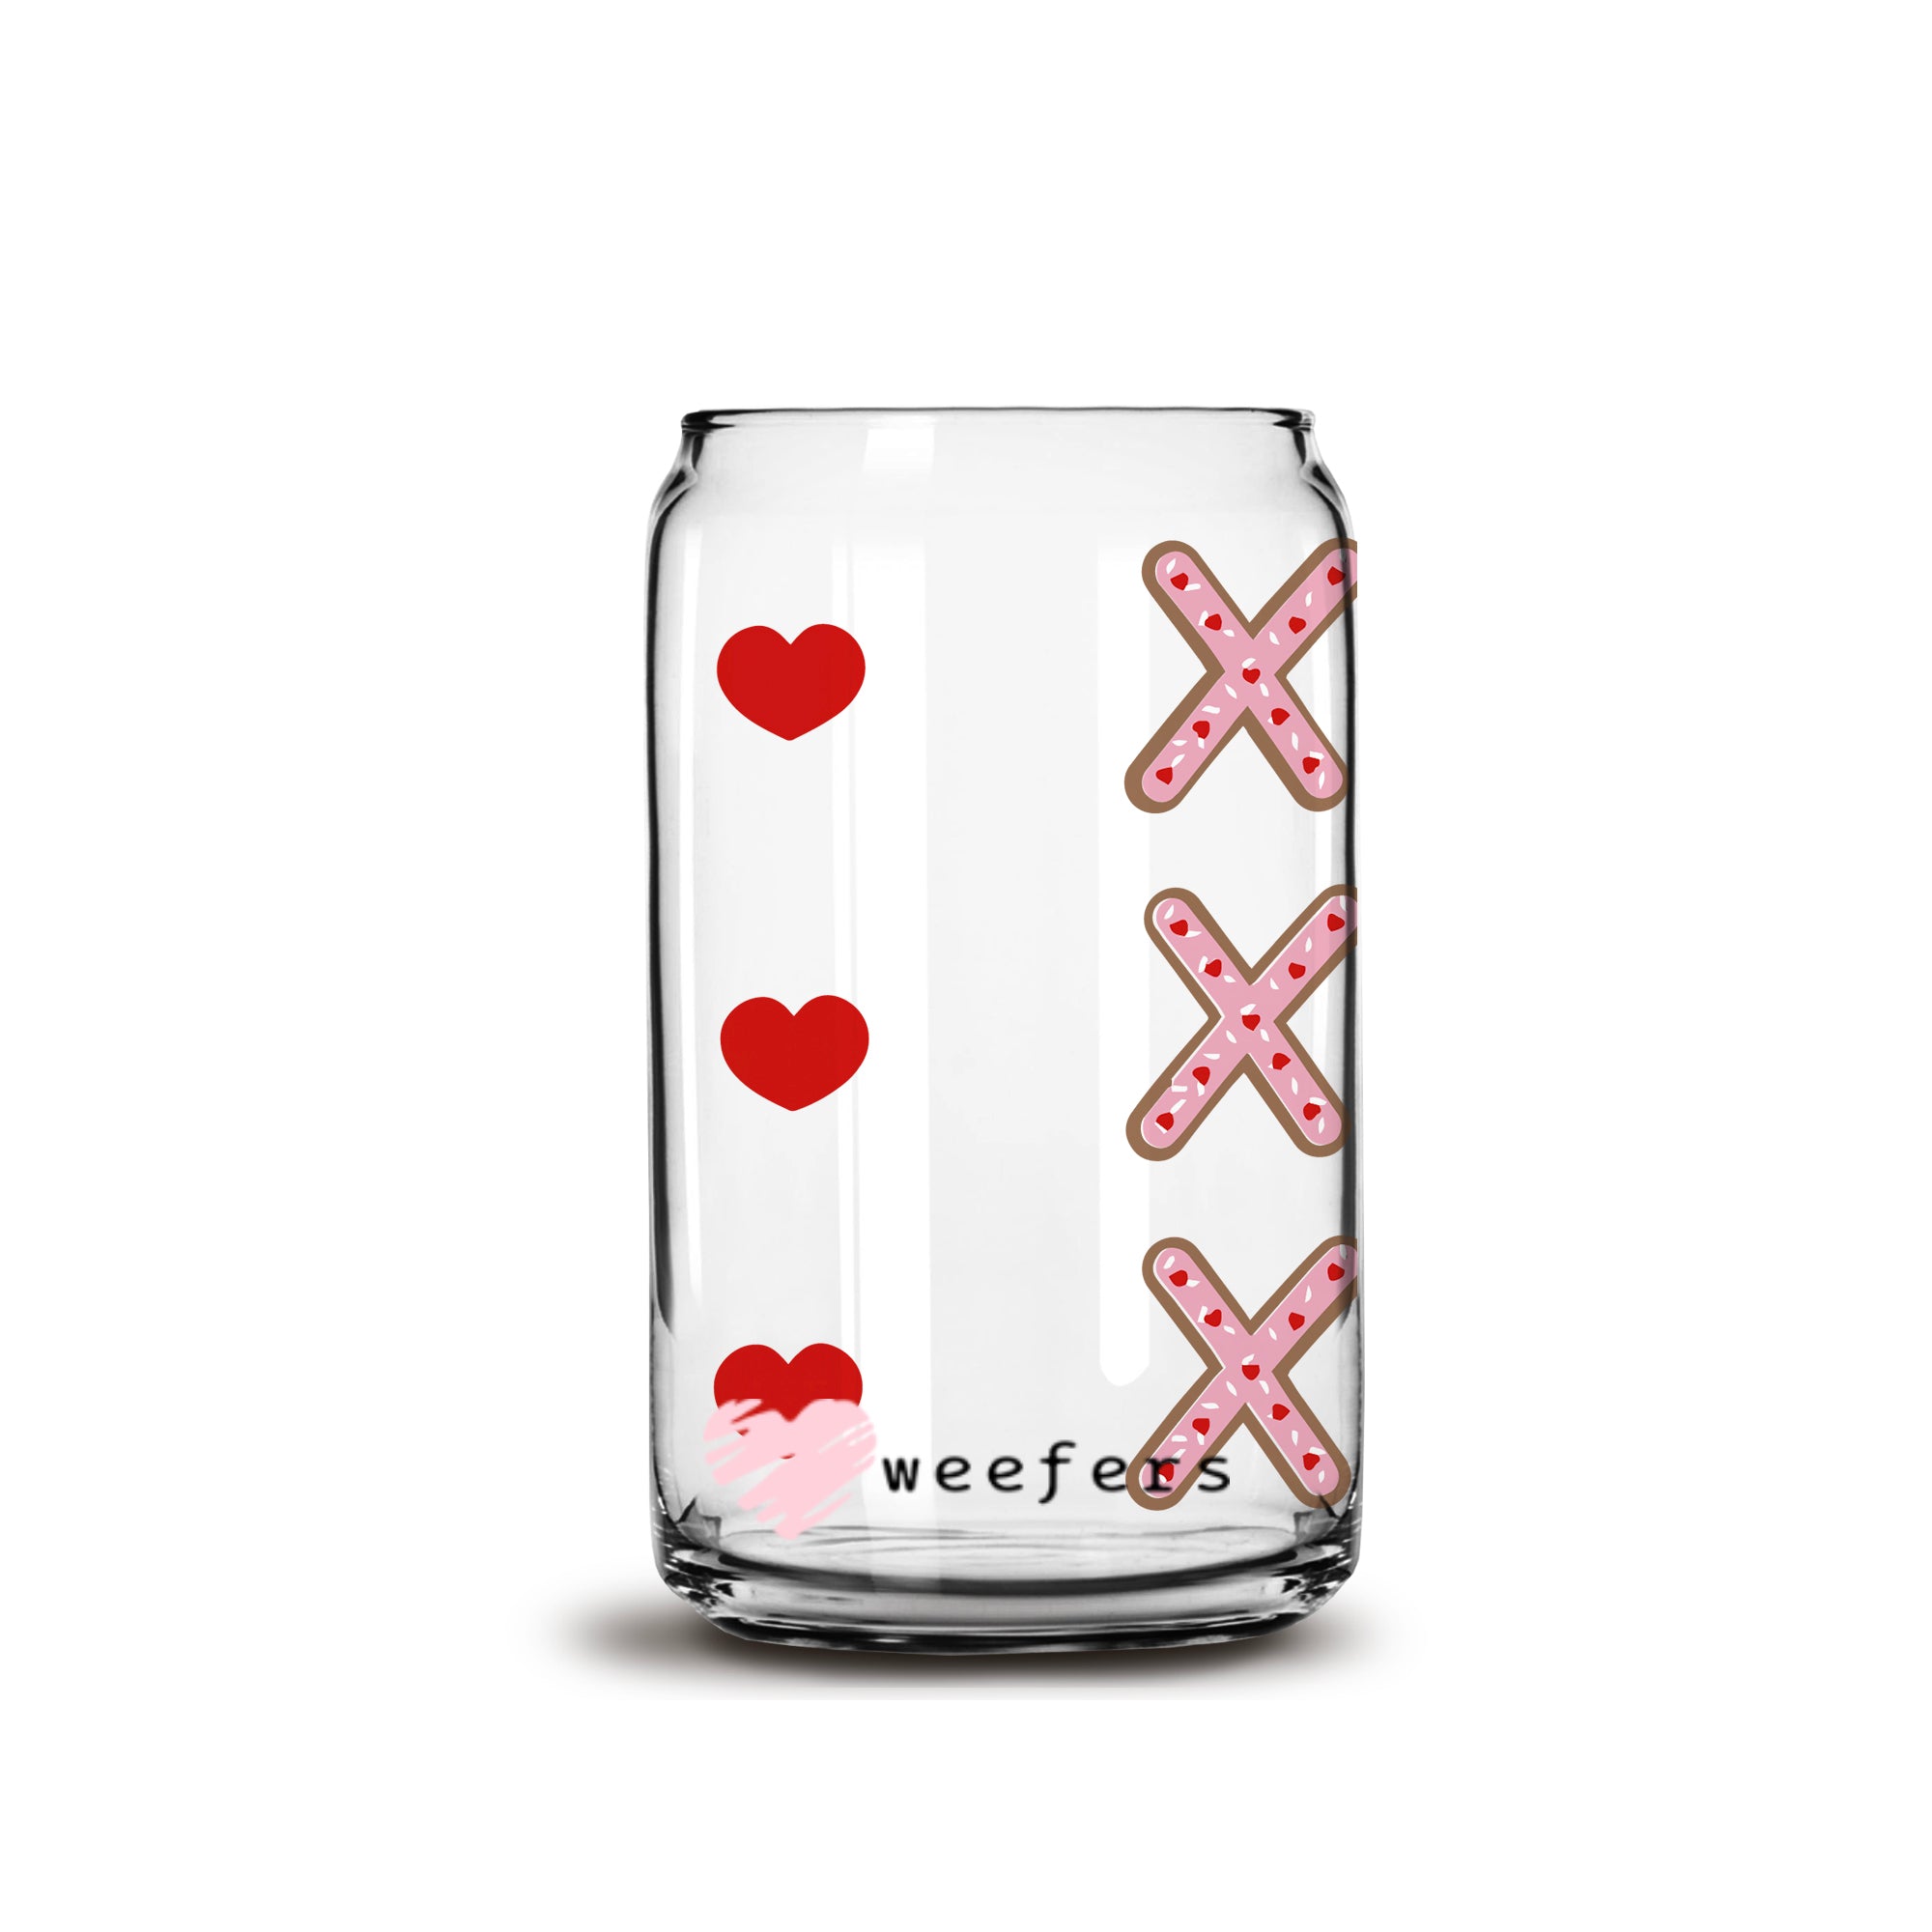  Rngmsi UV DTF Cup Wrap Transfer Stickers 8 Sheets Valentines  Day Uvdtf Cup Wraps Red Heart Dwarf UV DTF Wraps Waterproof UV DTF Cup Wraps  for 16 oz Glass Cups Water